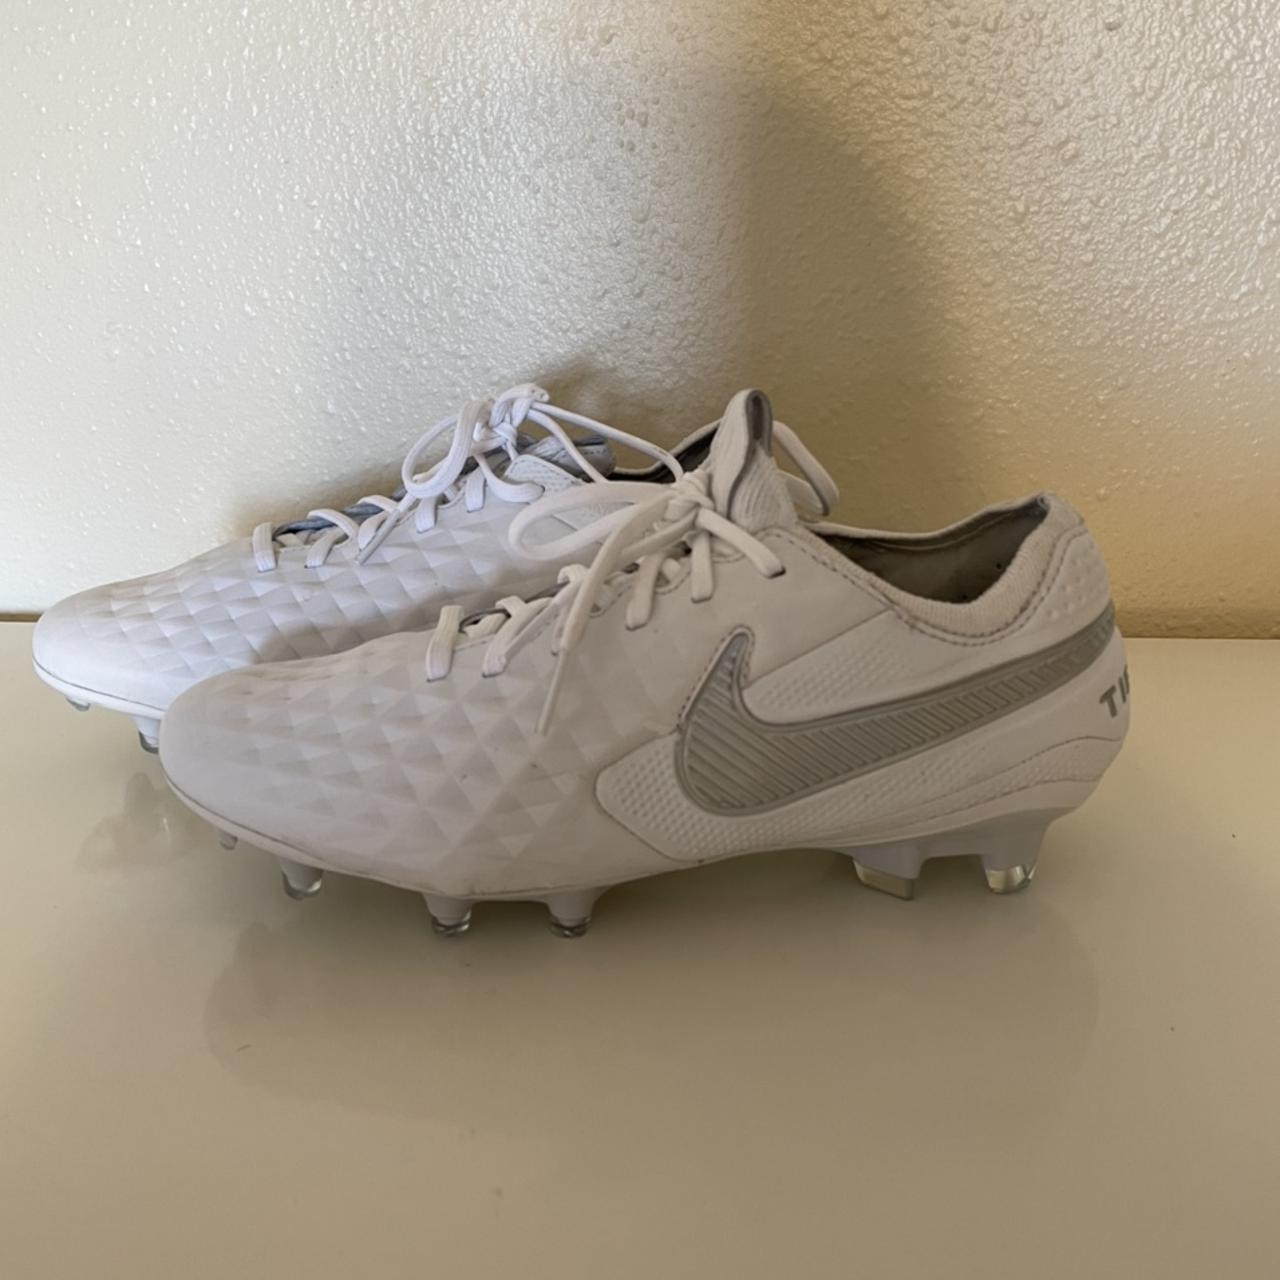 Nike Women's White and Silver (2)